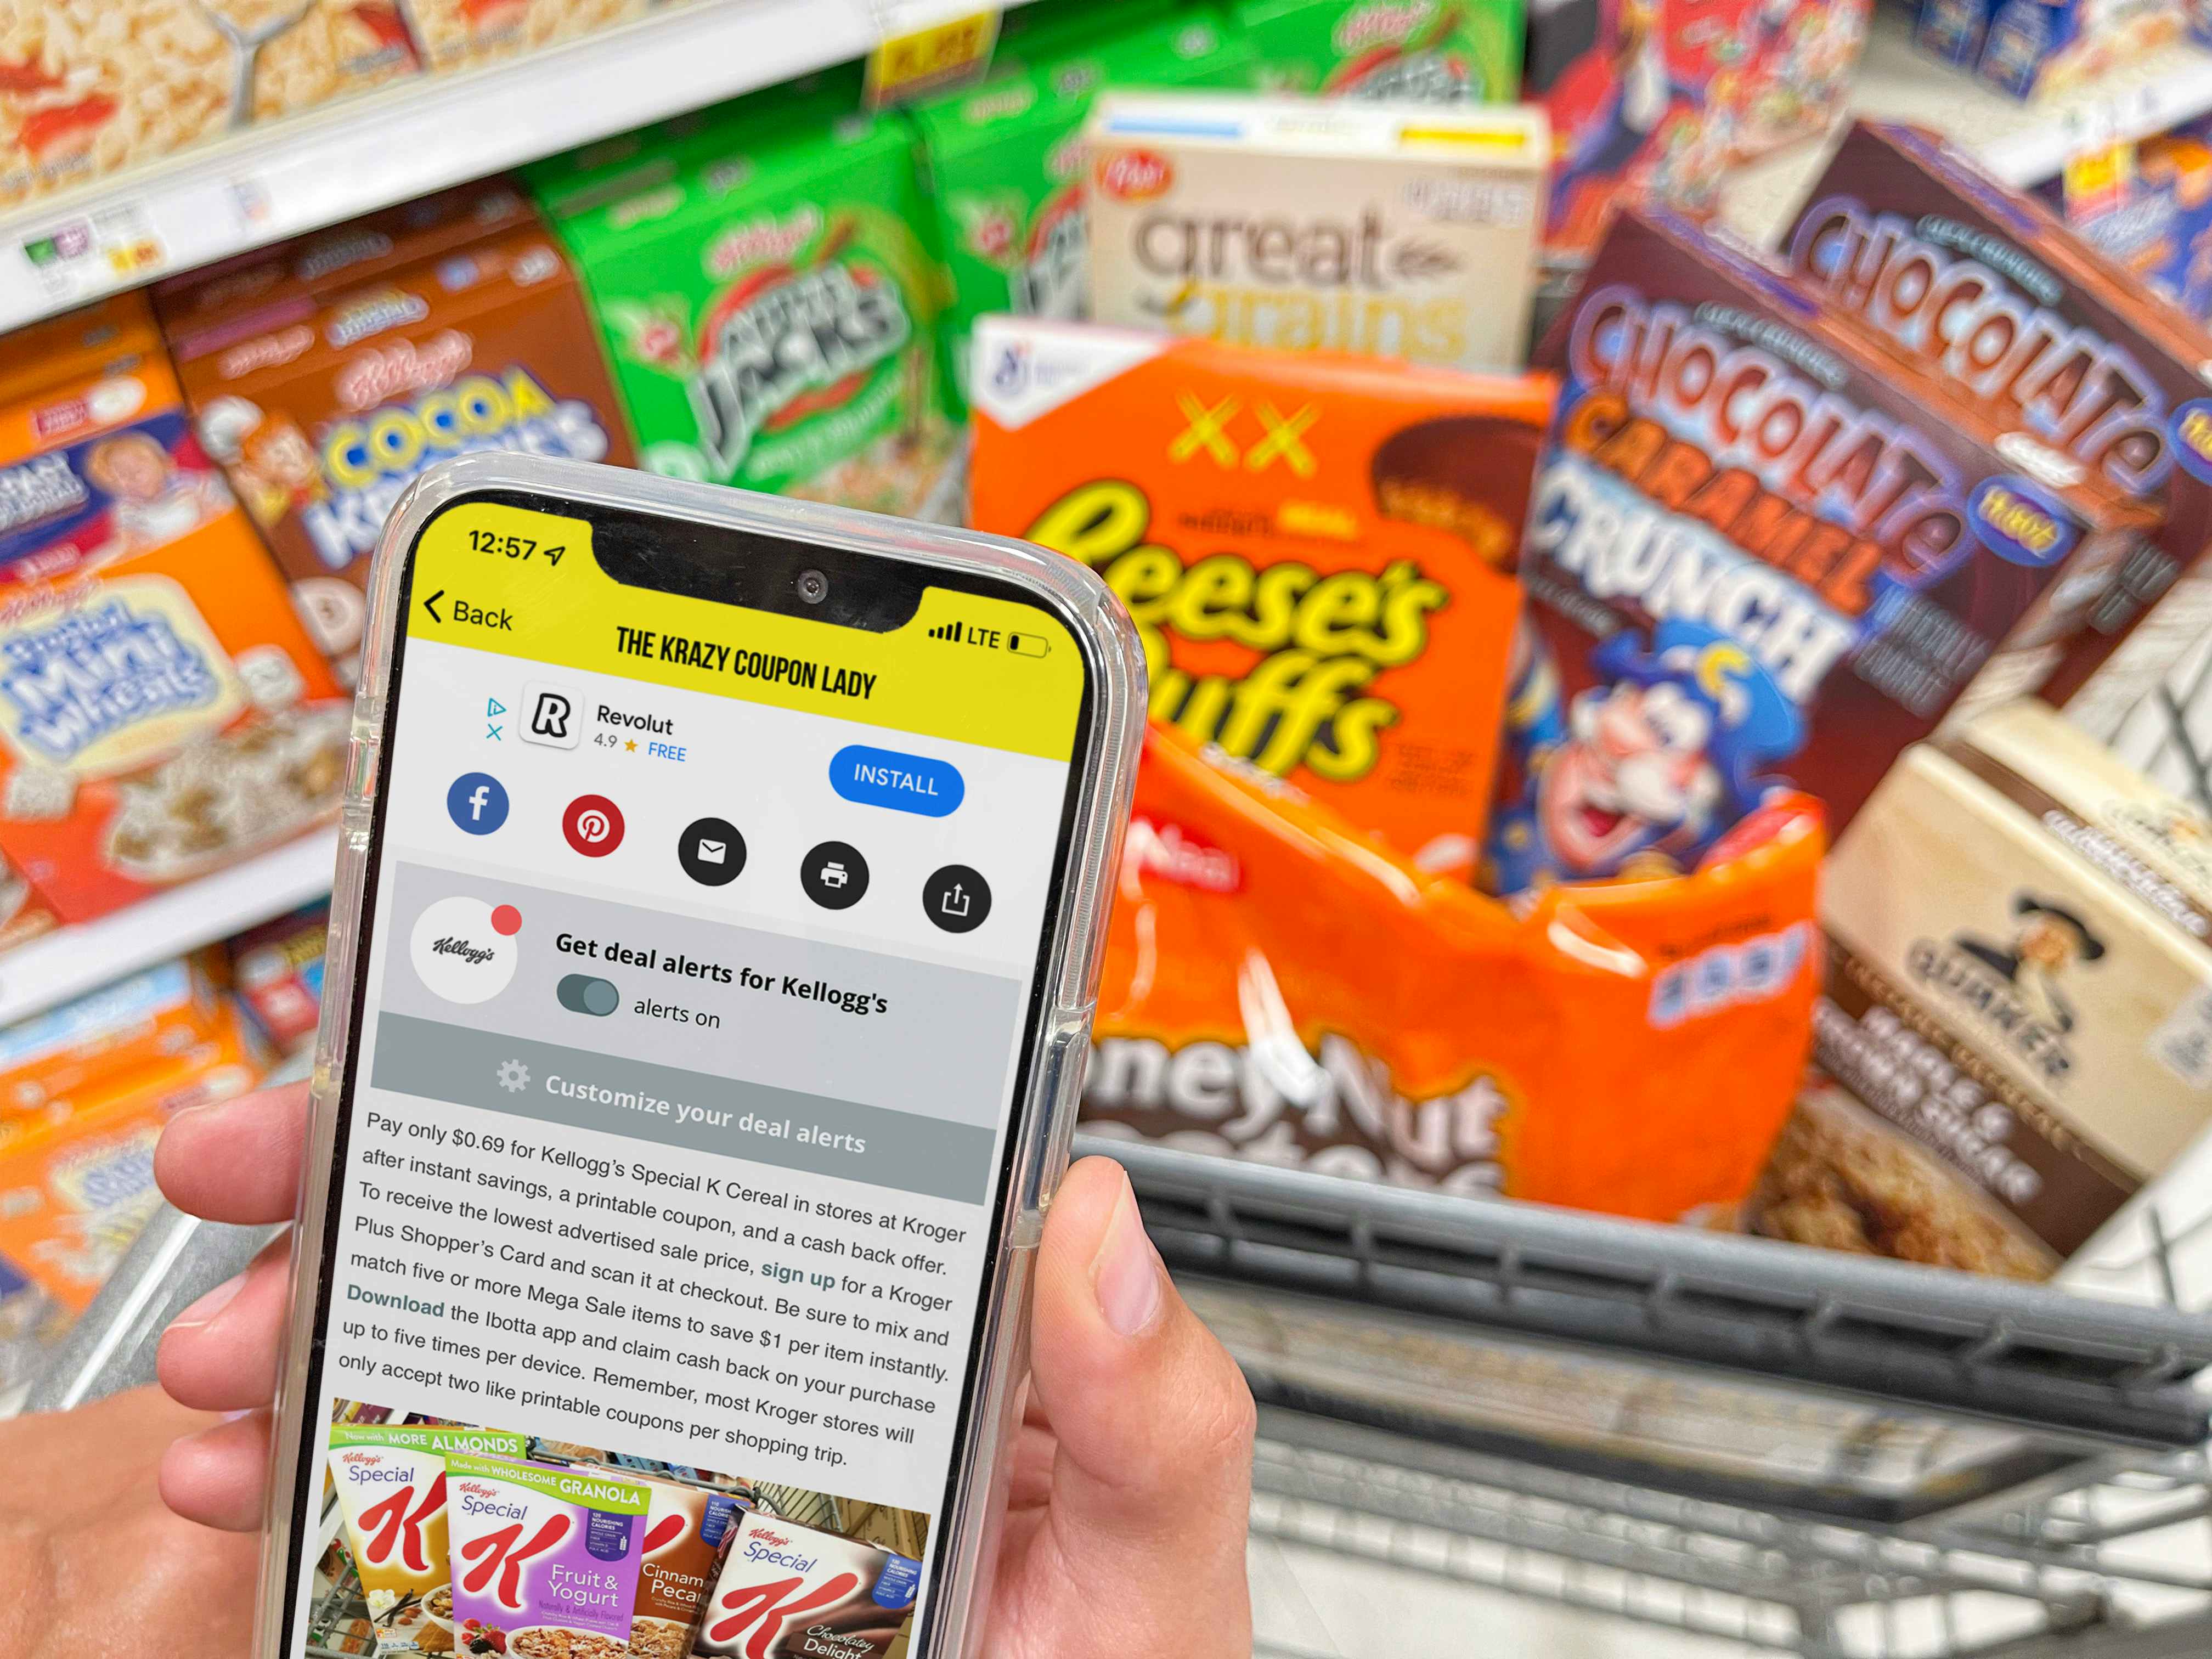 A person's hands holding a cellphone displaying the Krazy Coupon Lady mobile app's page for Kellogg's deals in front of a cart full of Kellogg's brand cereal.